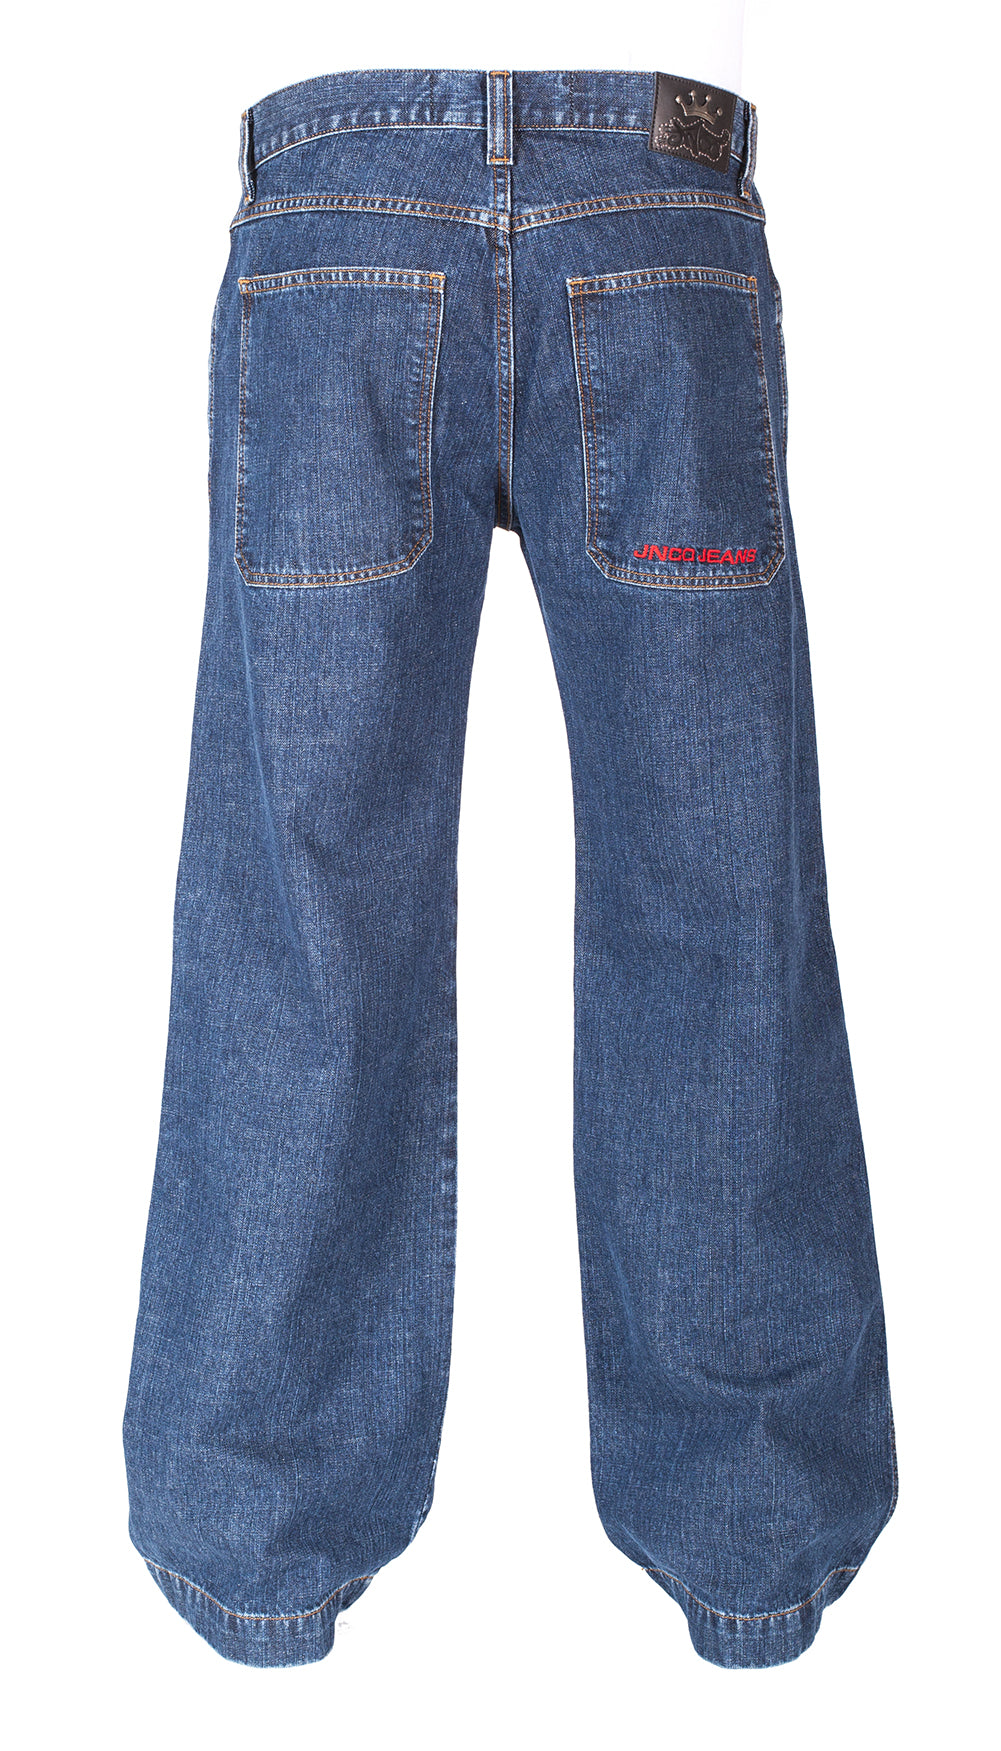 Original JNCO 179 Jeans - 179's Pipes Jnco Jeans – Bewild